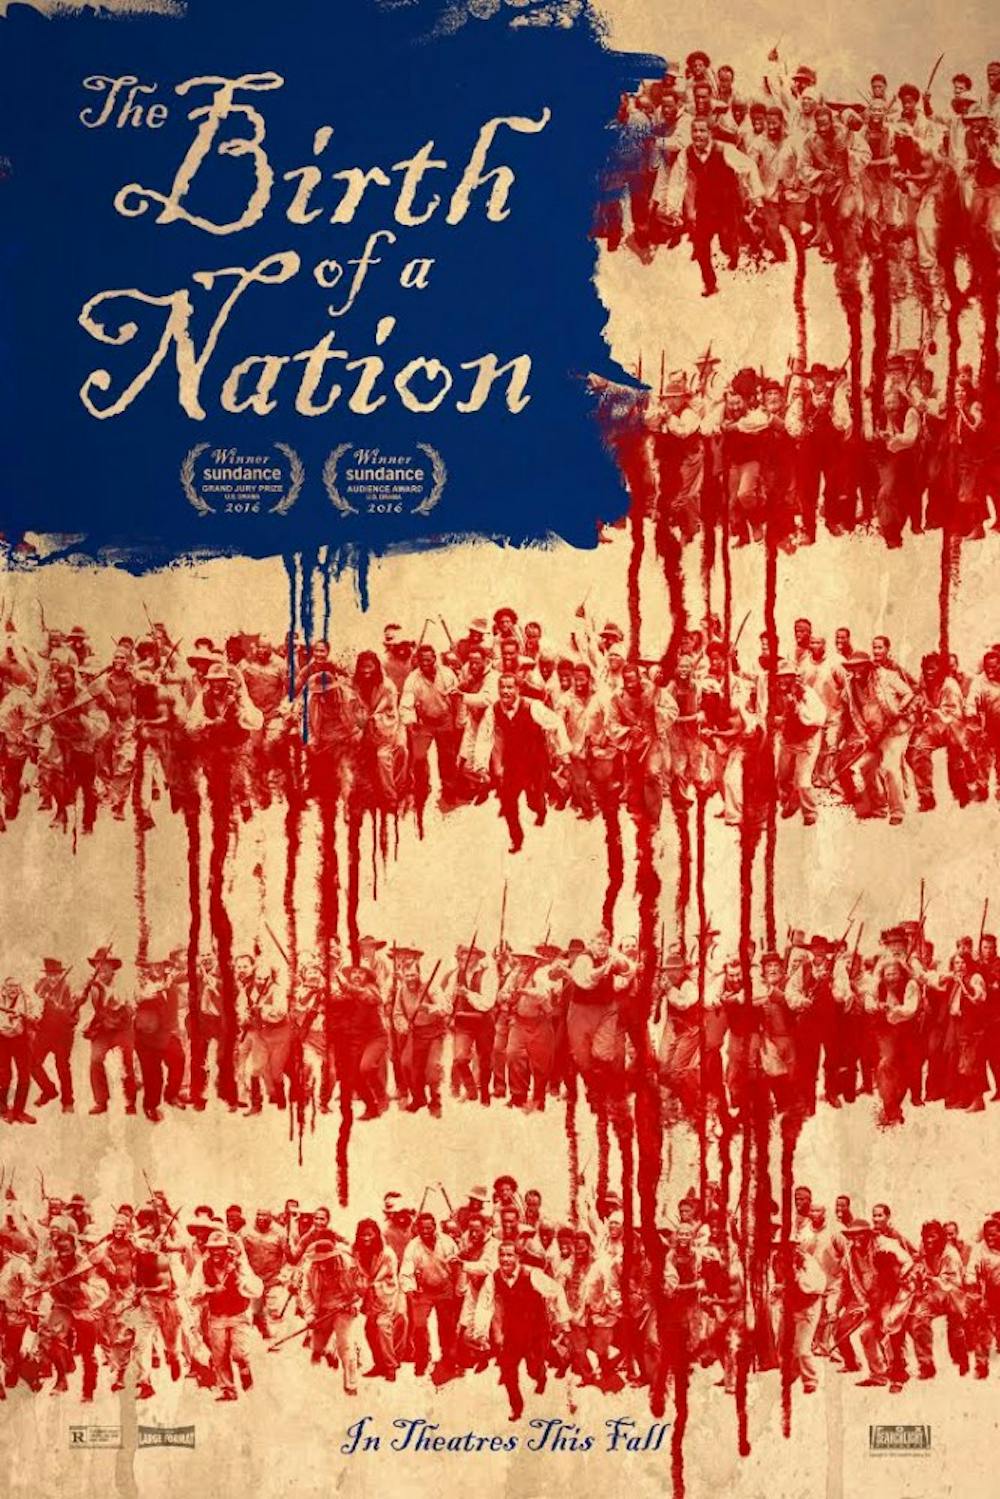 <p>"The Birth of a Nation" chronicles the Nat Turner rebellion in 1831.&nbsp;</p>